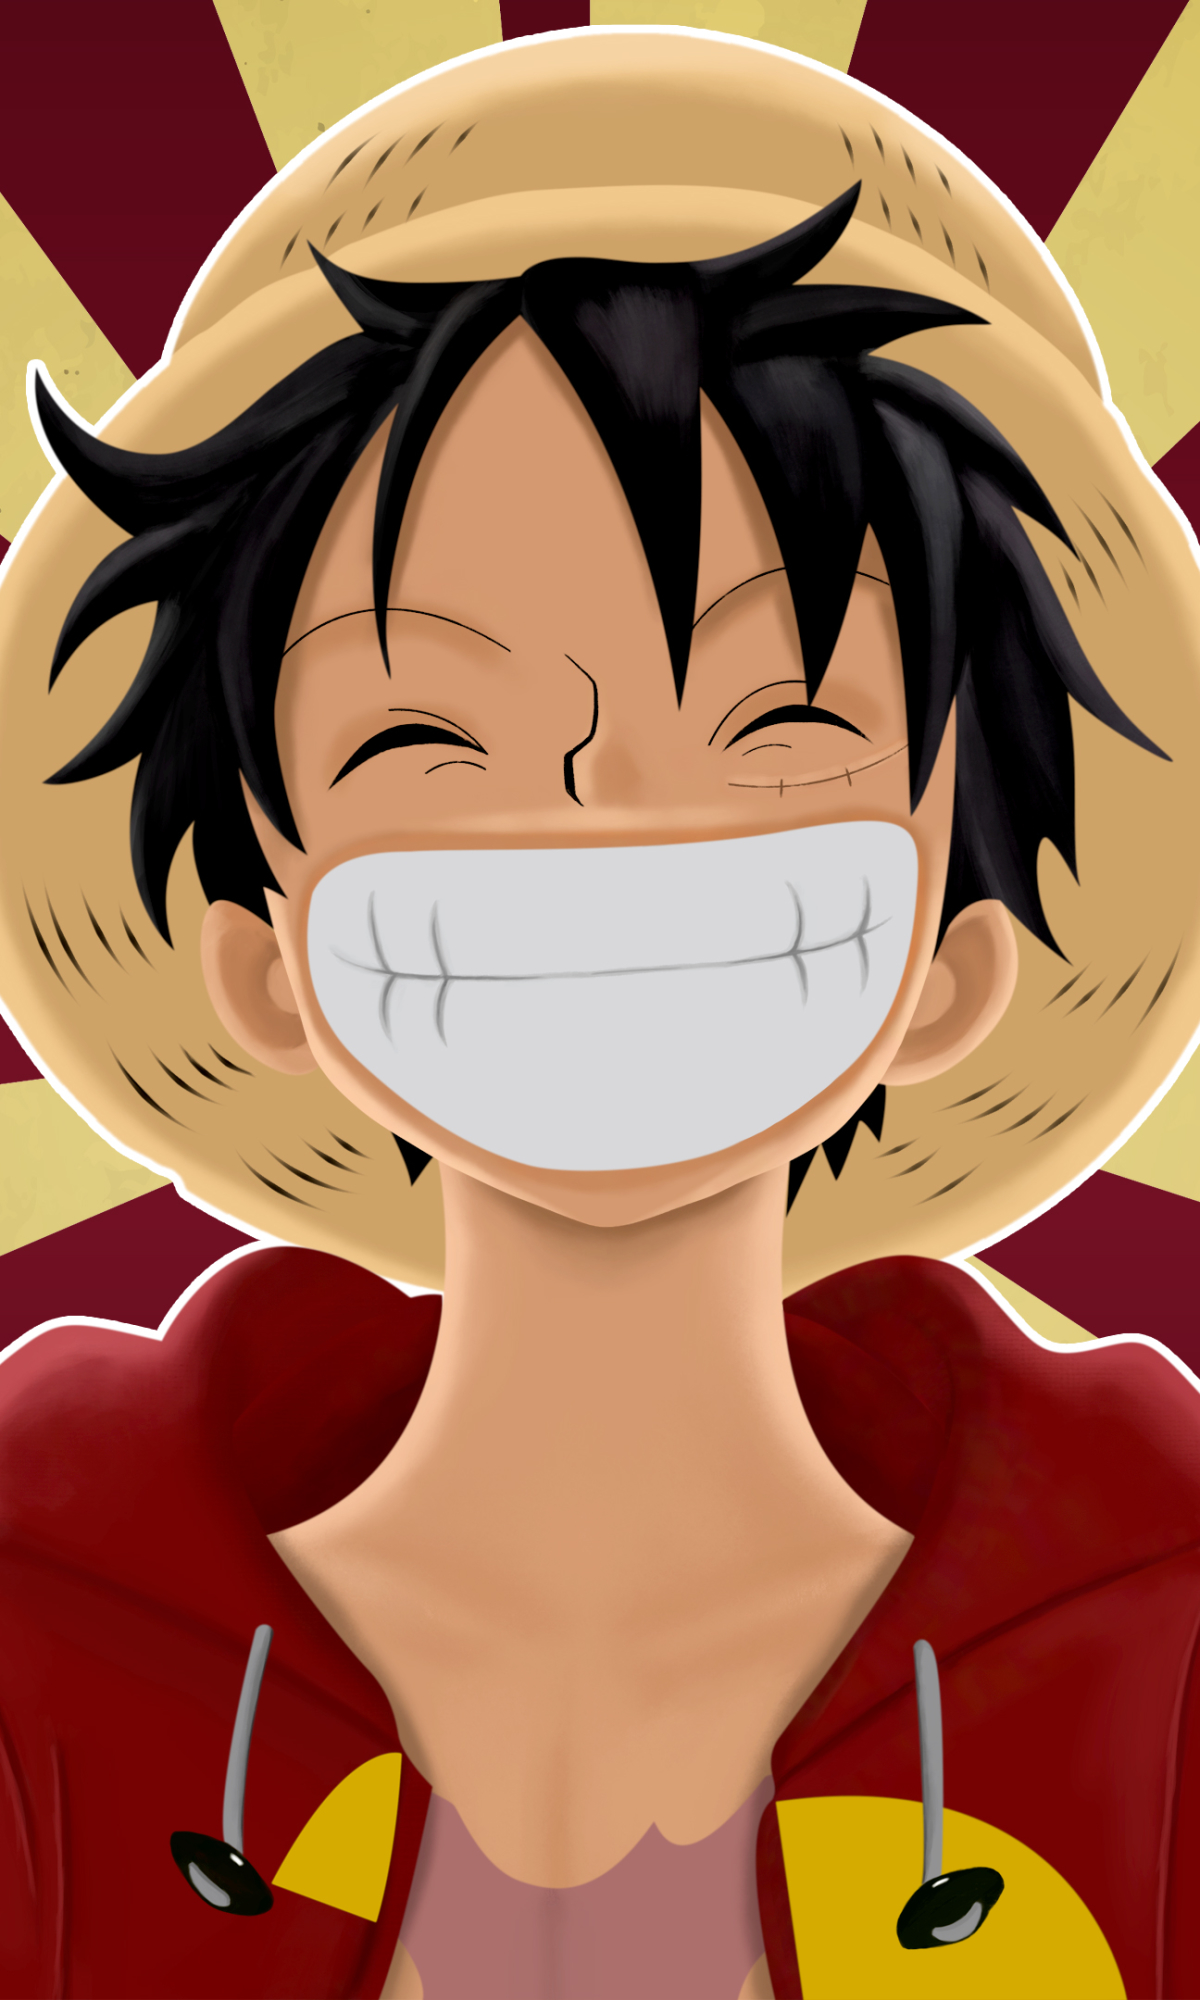 Pirate Monkey D luffy from One Piece